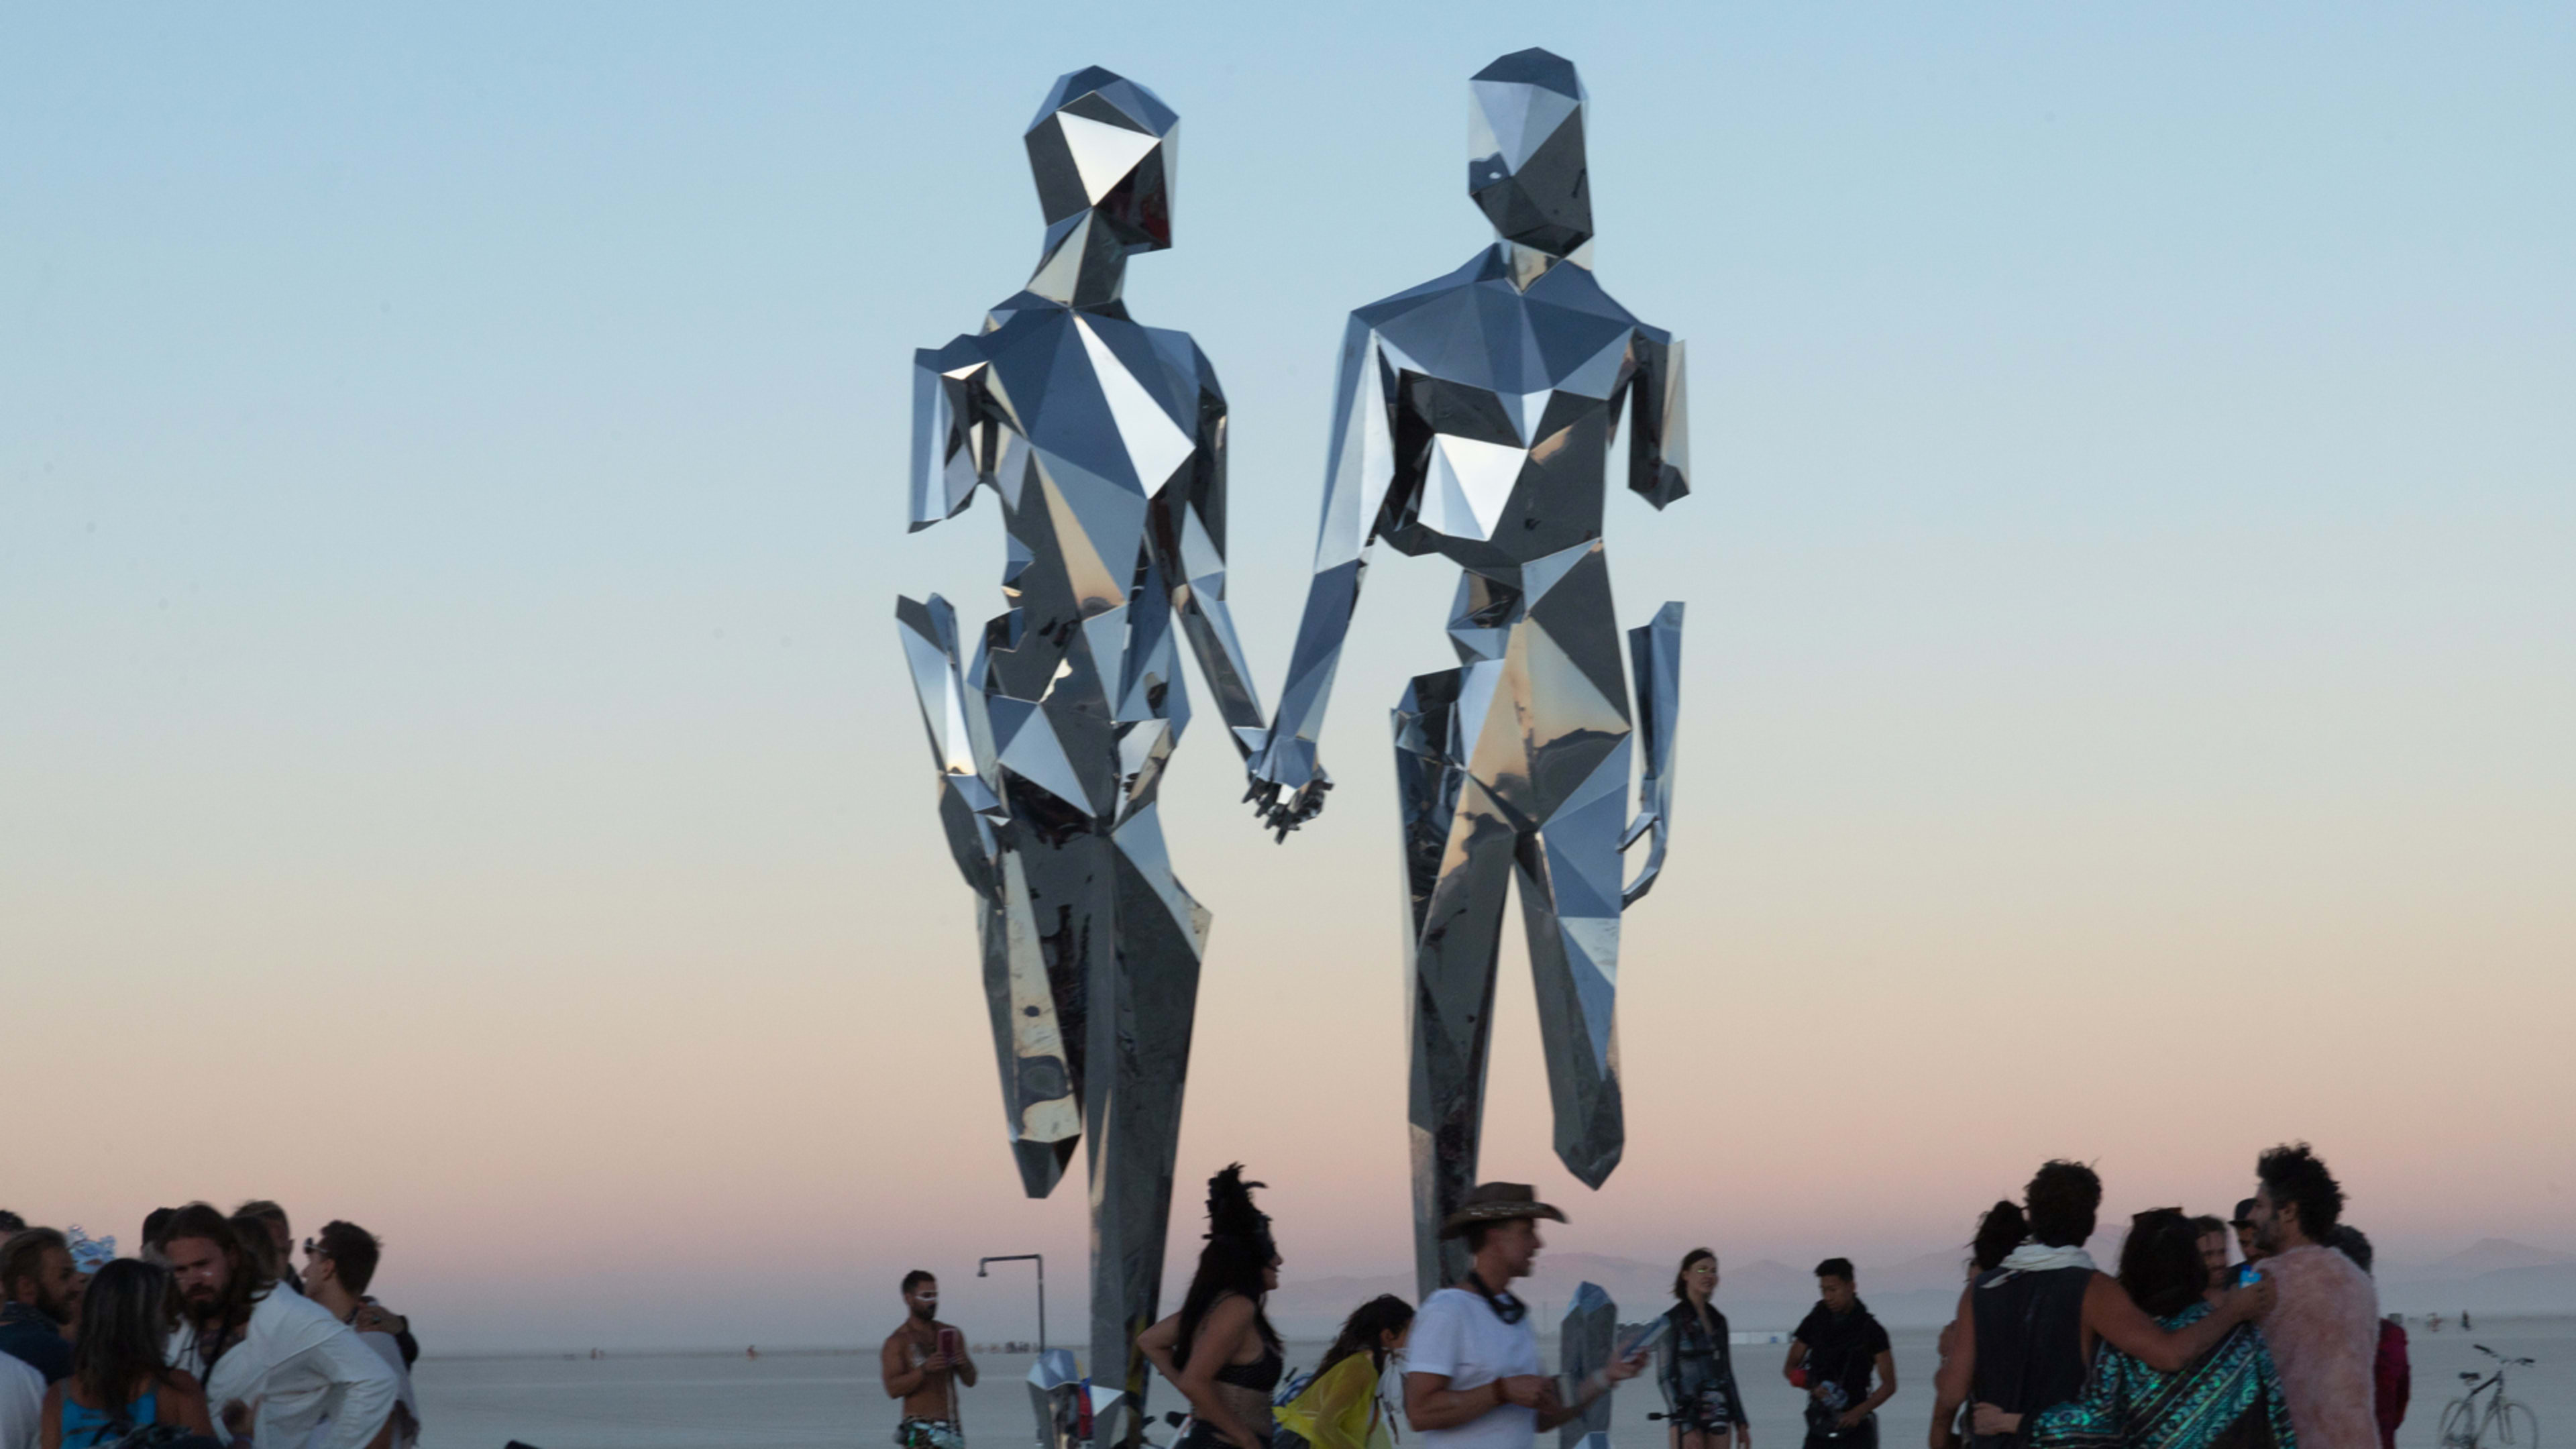 The design of Burning Man just keeps getting more ambitious